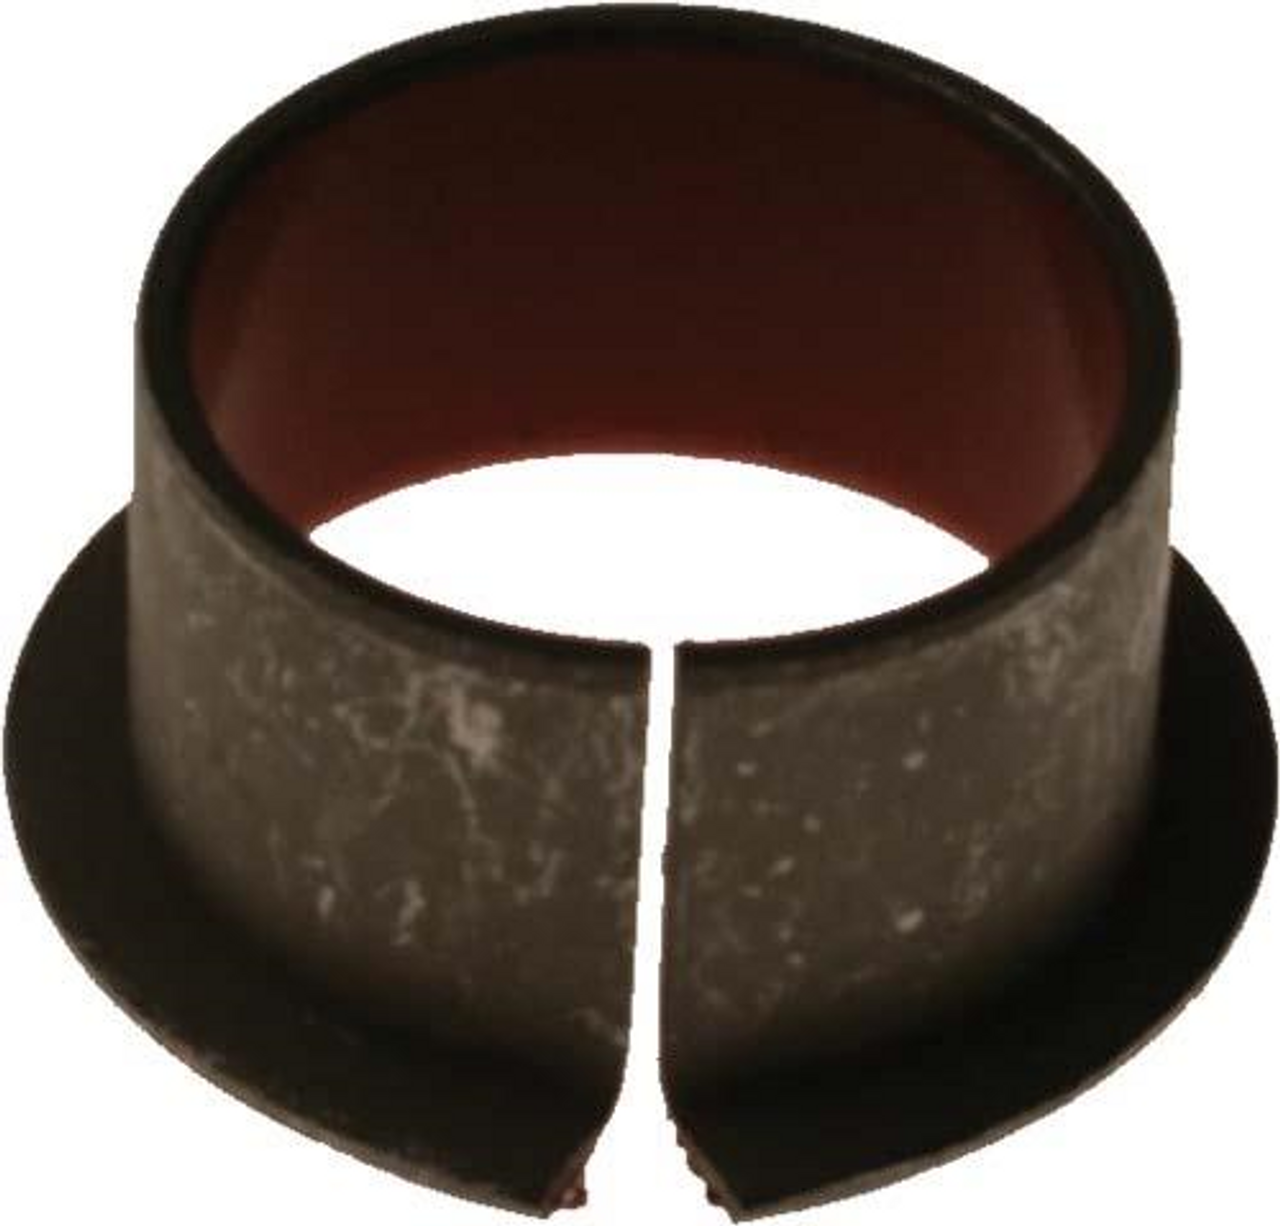 E-Z-GO TXT Spindle Bushing with Flange (Years 2001-Up), 8341